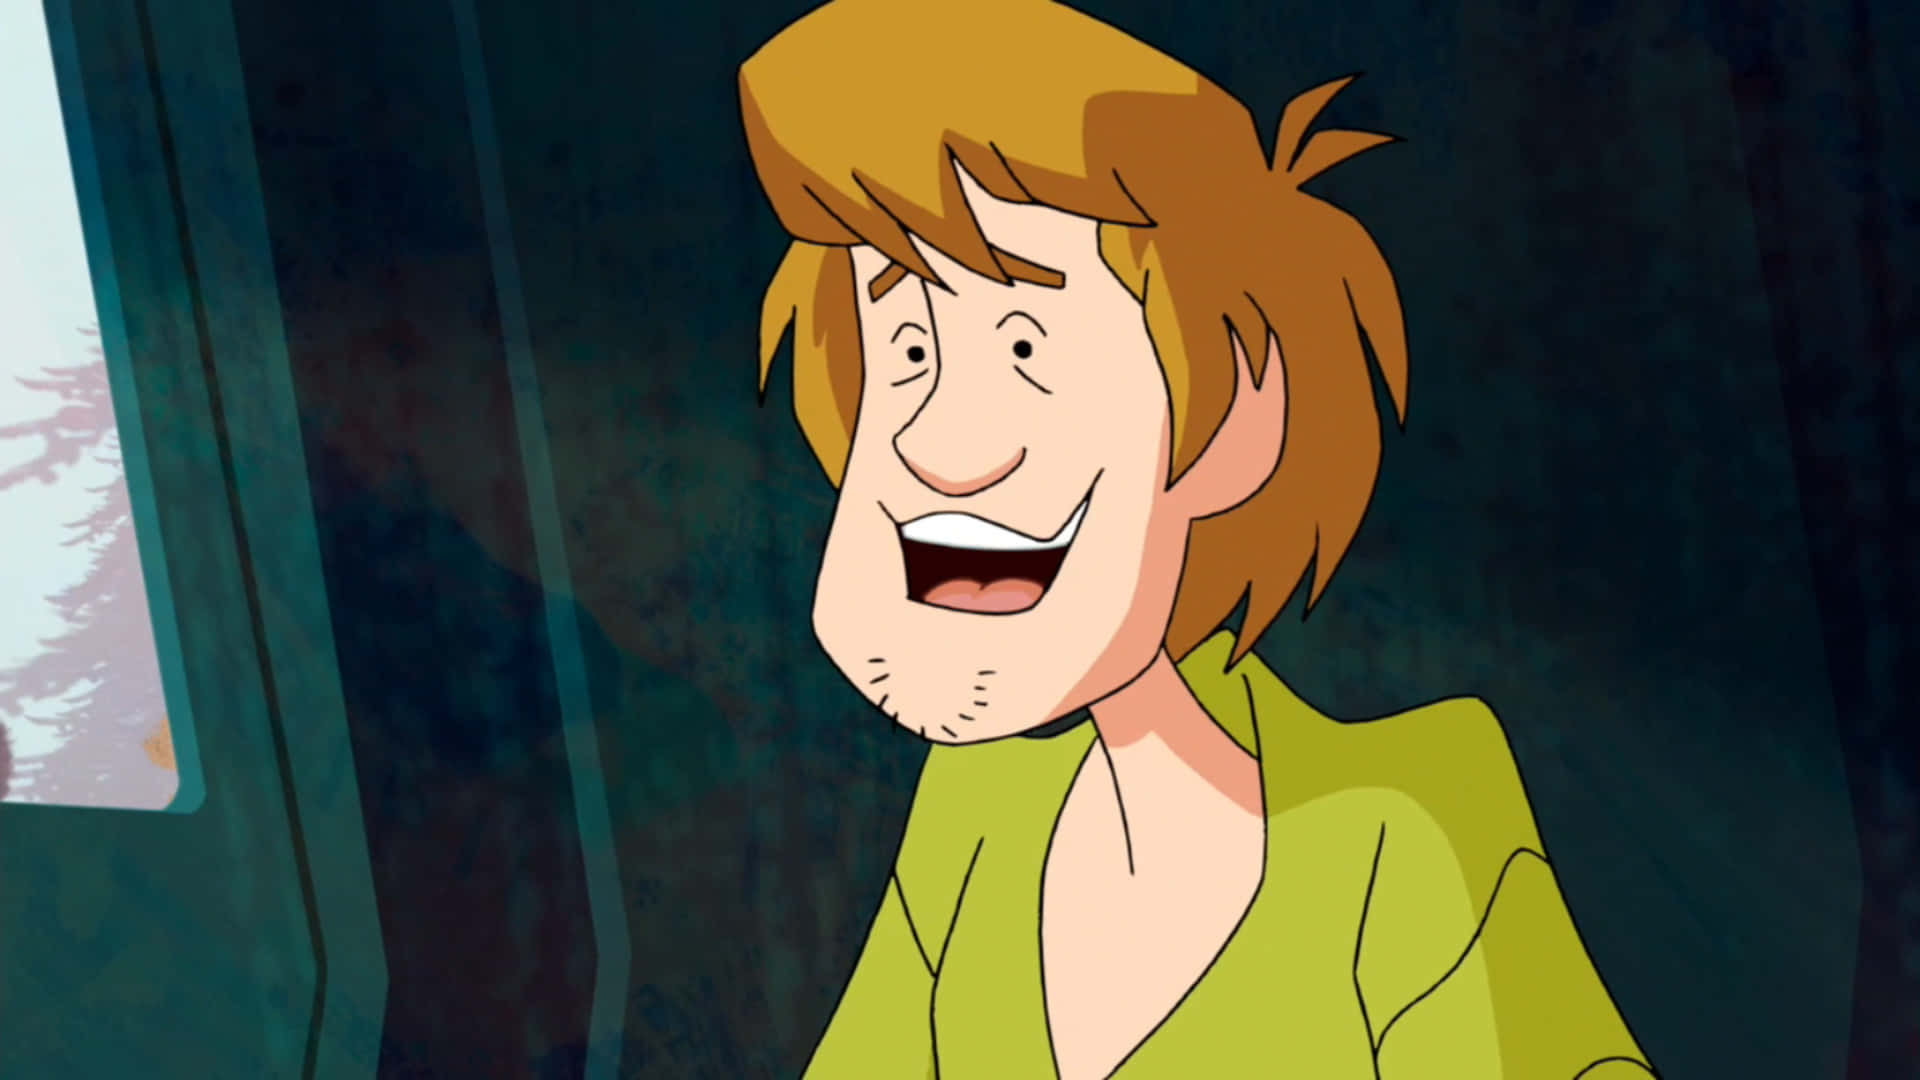 Shaggy Rogers shows off his famous comedic cadence and style. Wallpaper